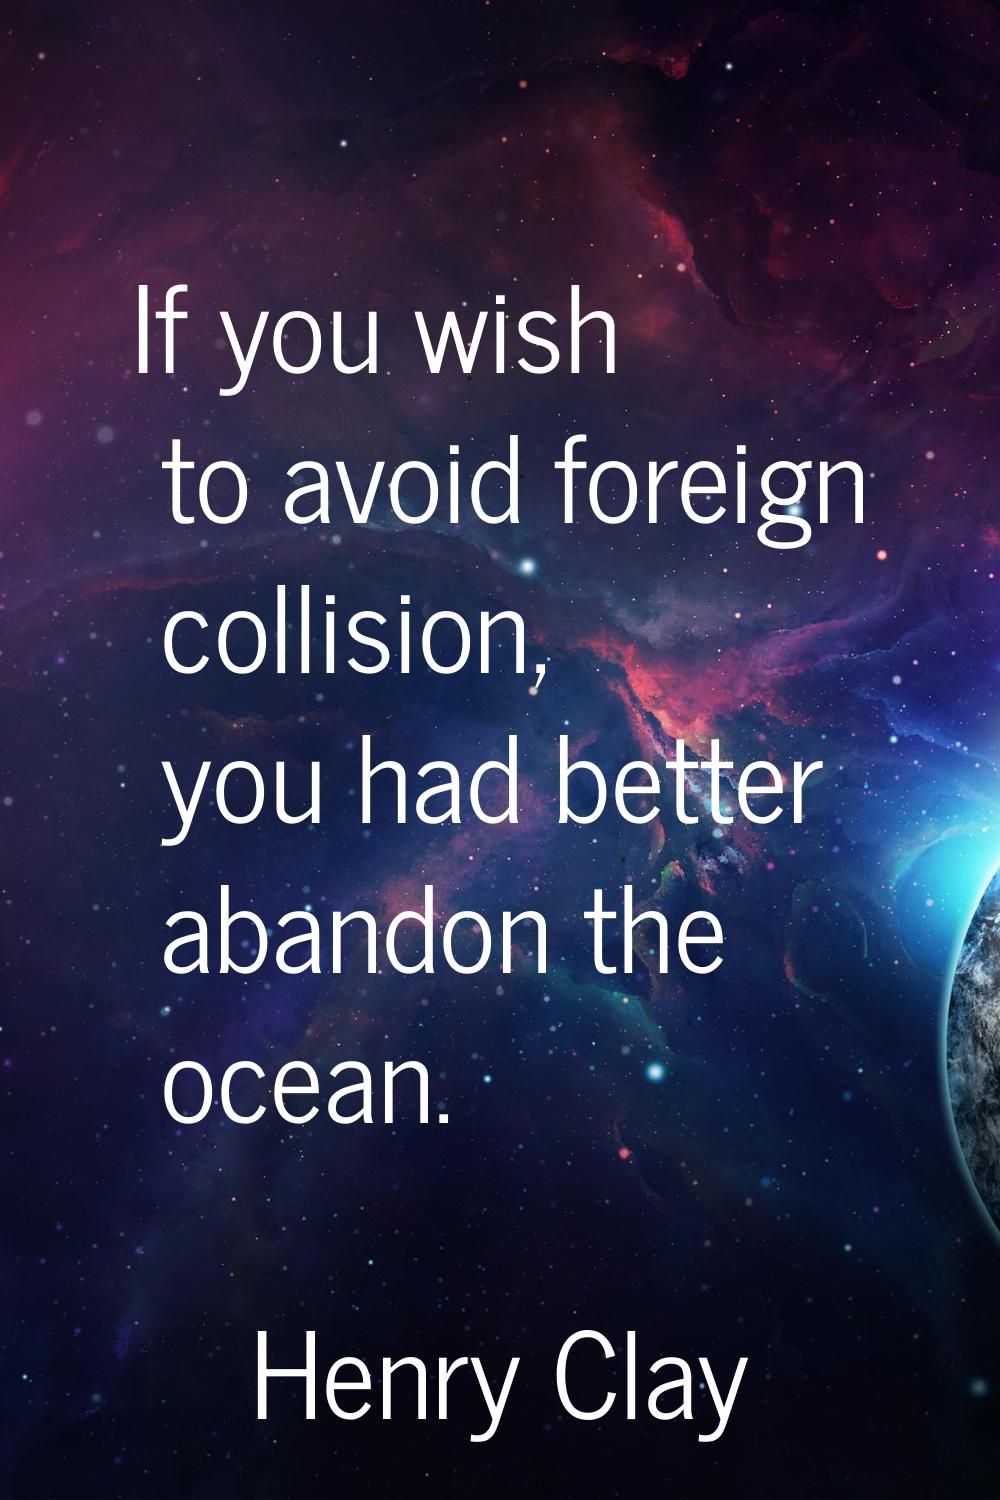 If you wish to avoid foreign collision, you had better abandon the ocean.